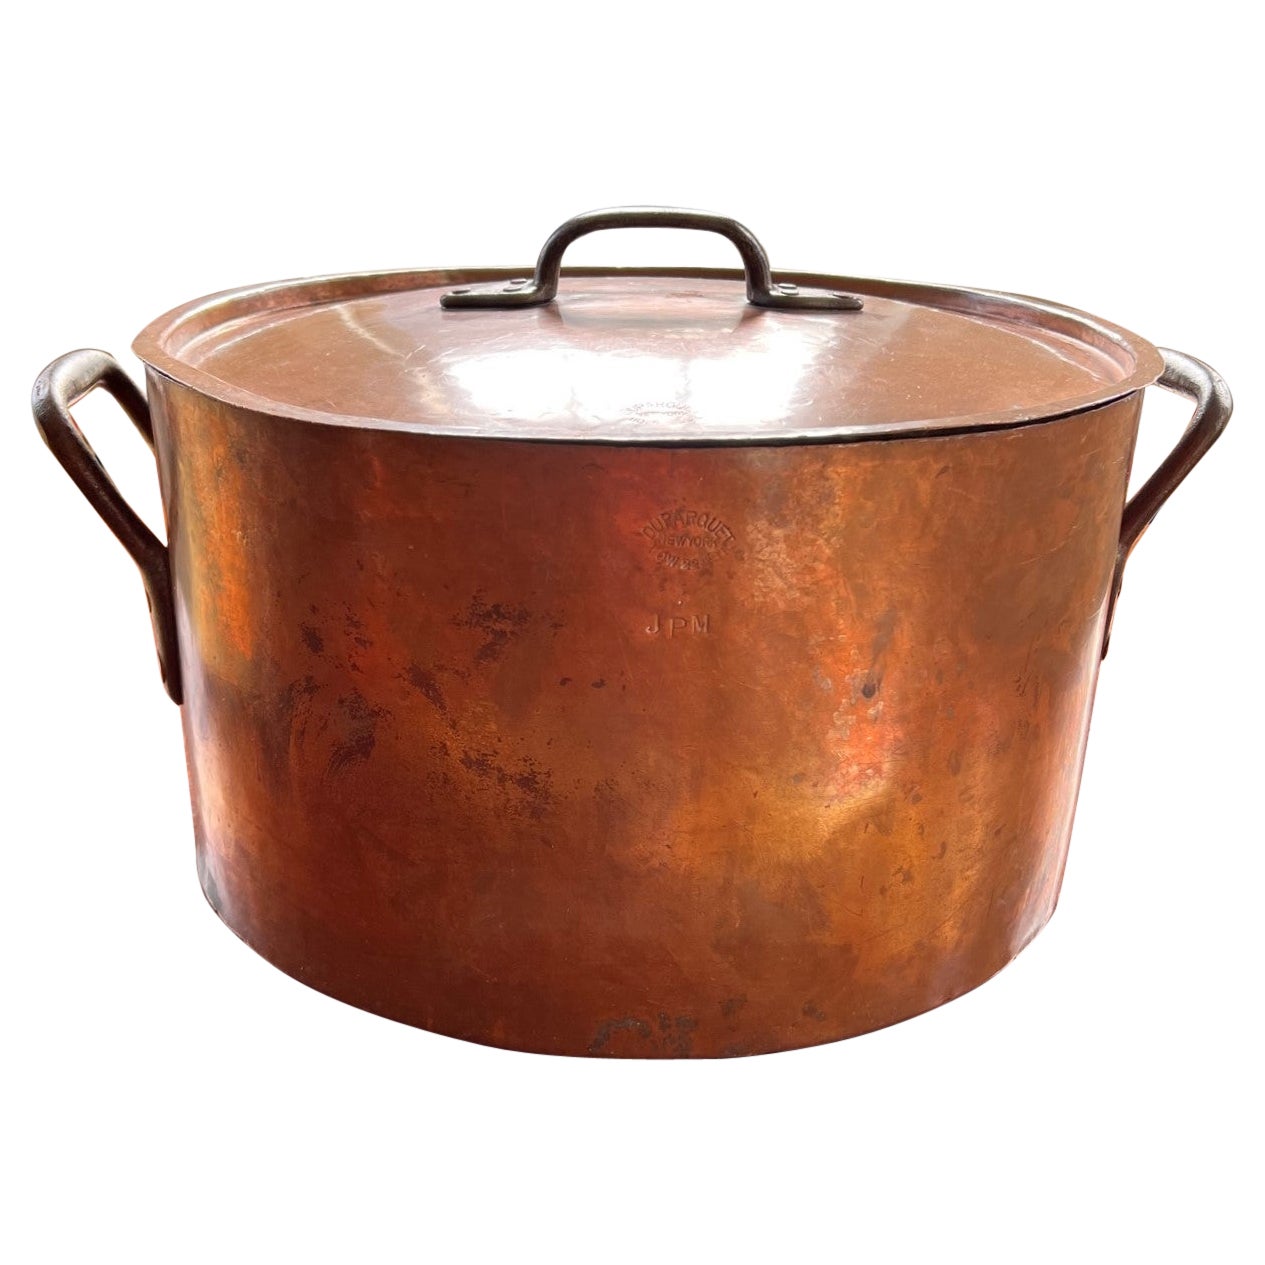 Enormous Hand Crafted Antique Copper Stock Pot with Lid, Duparquet, New York